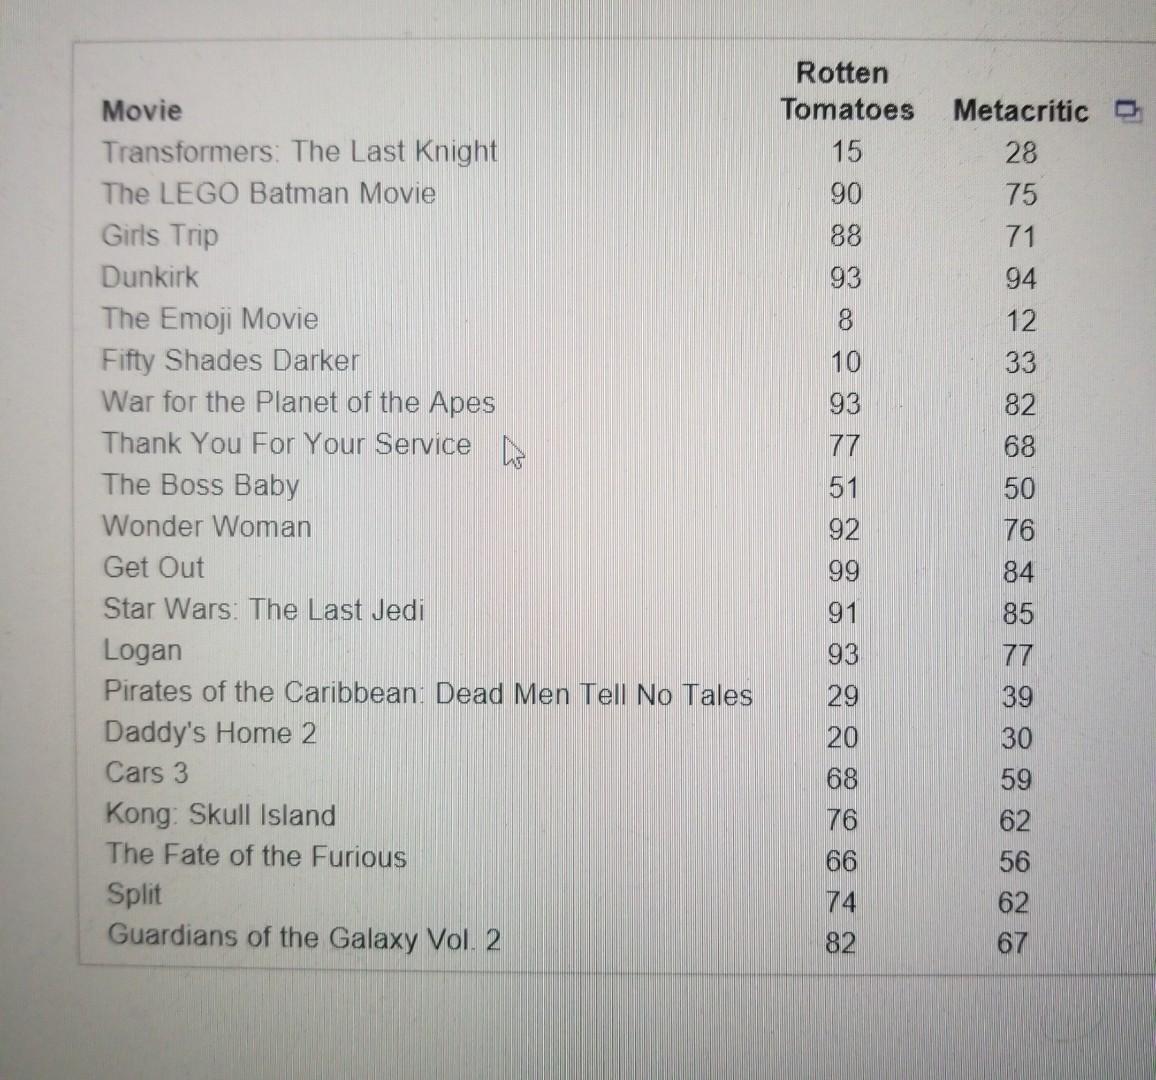 Solved The accompanying table gives the Rotten Tomatoes and 